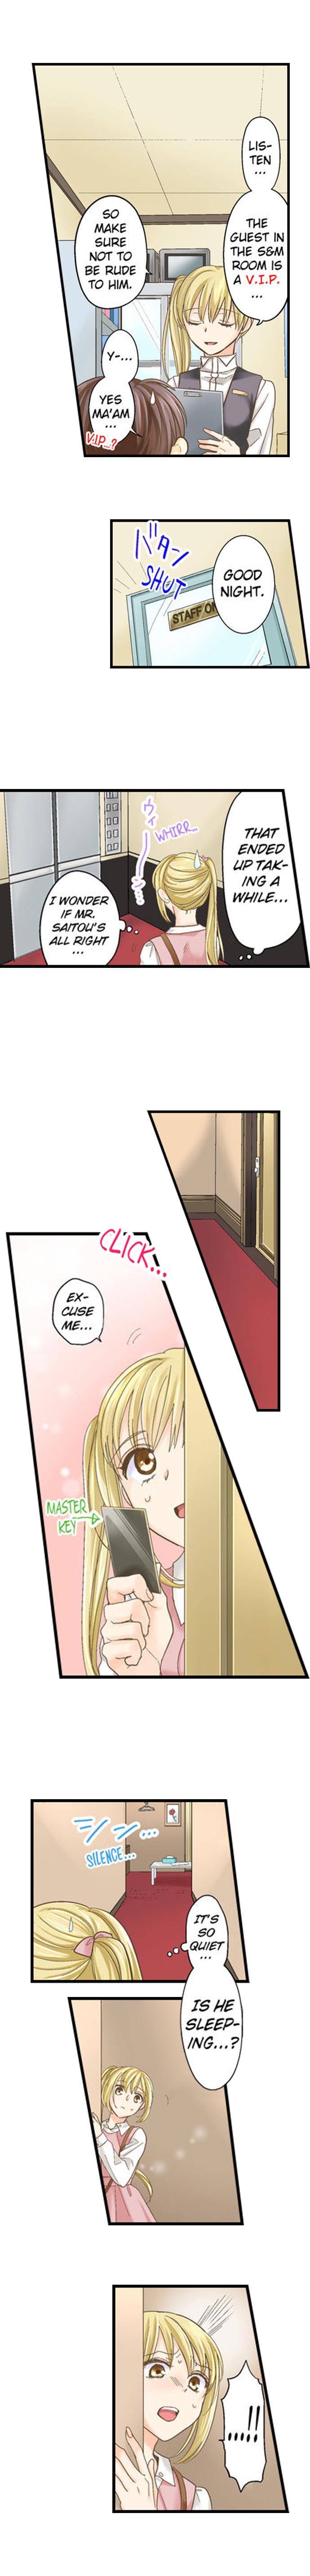 Running a Love Hotel with My Math Teacher - Chapter 37 Page 6